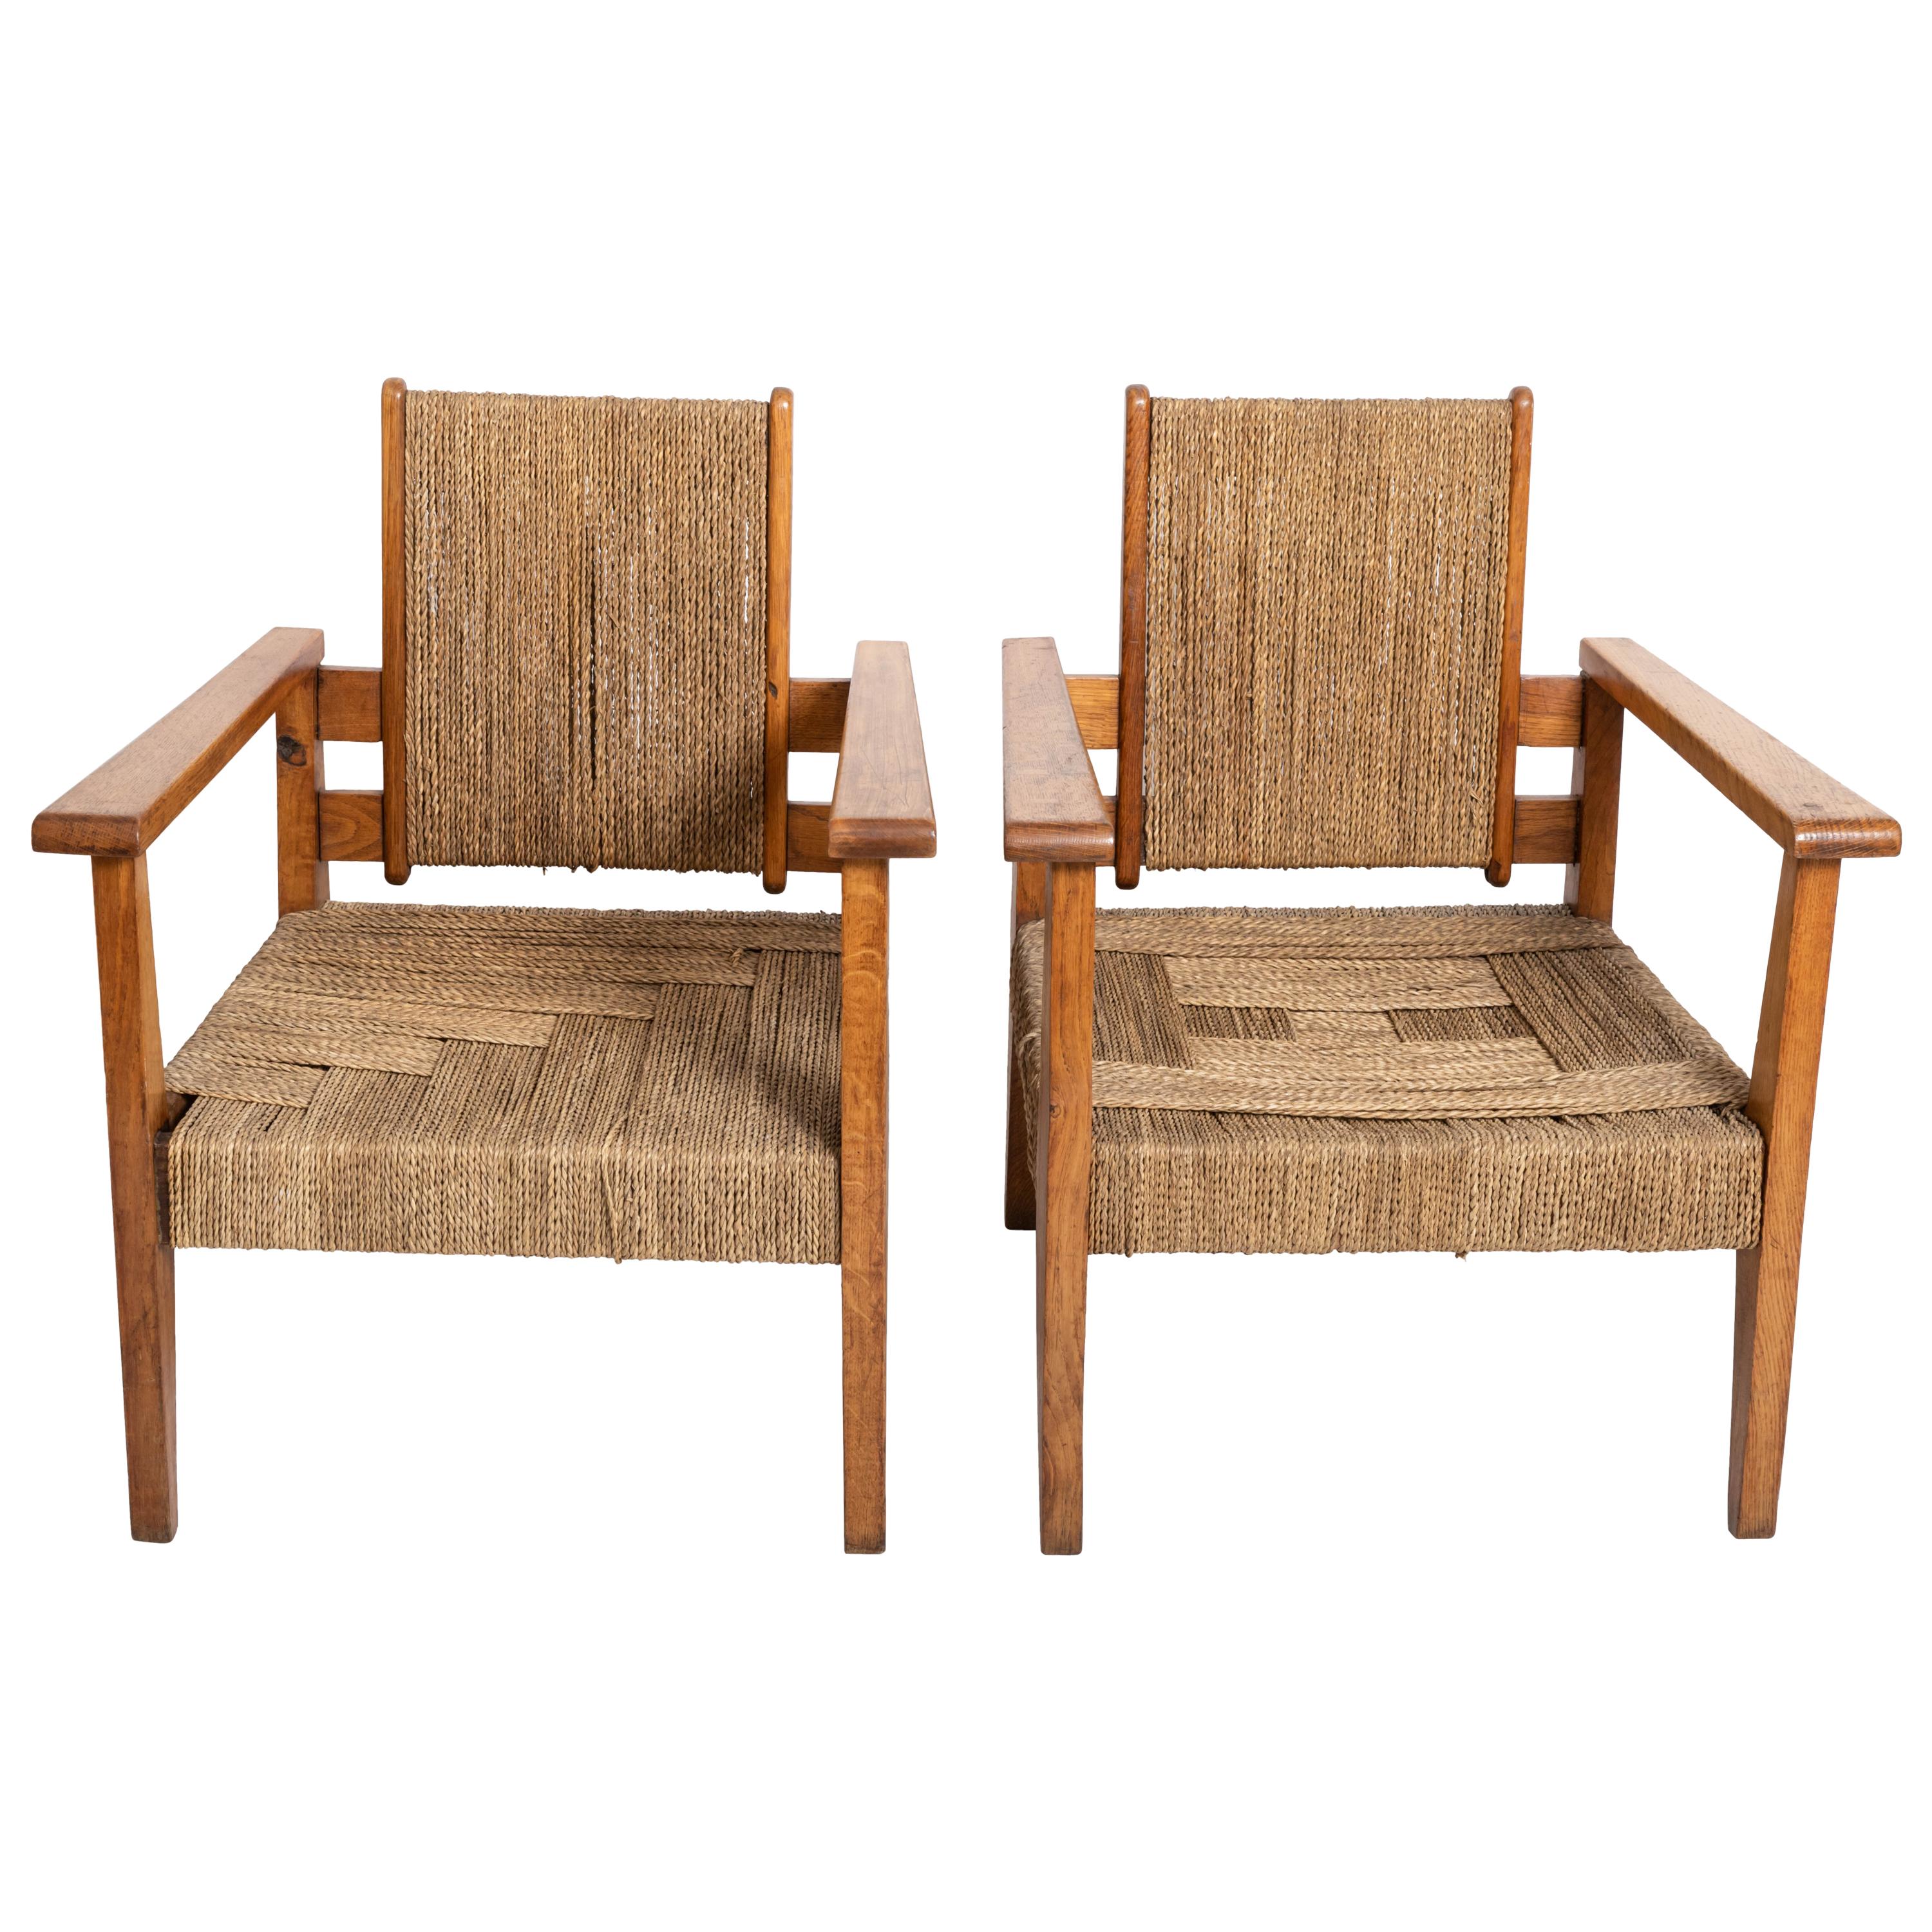 Pair of Mid-Century Oak Armchairs, France, circa 1950's For Sale